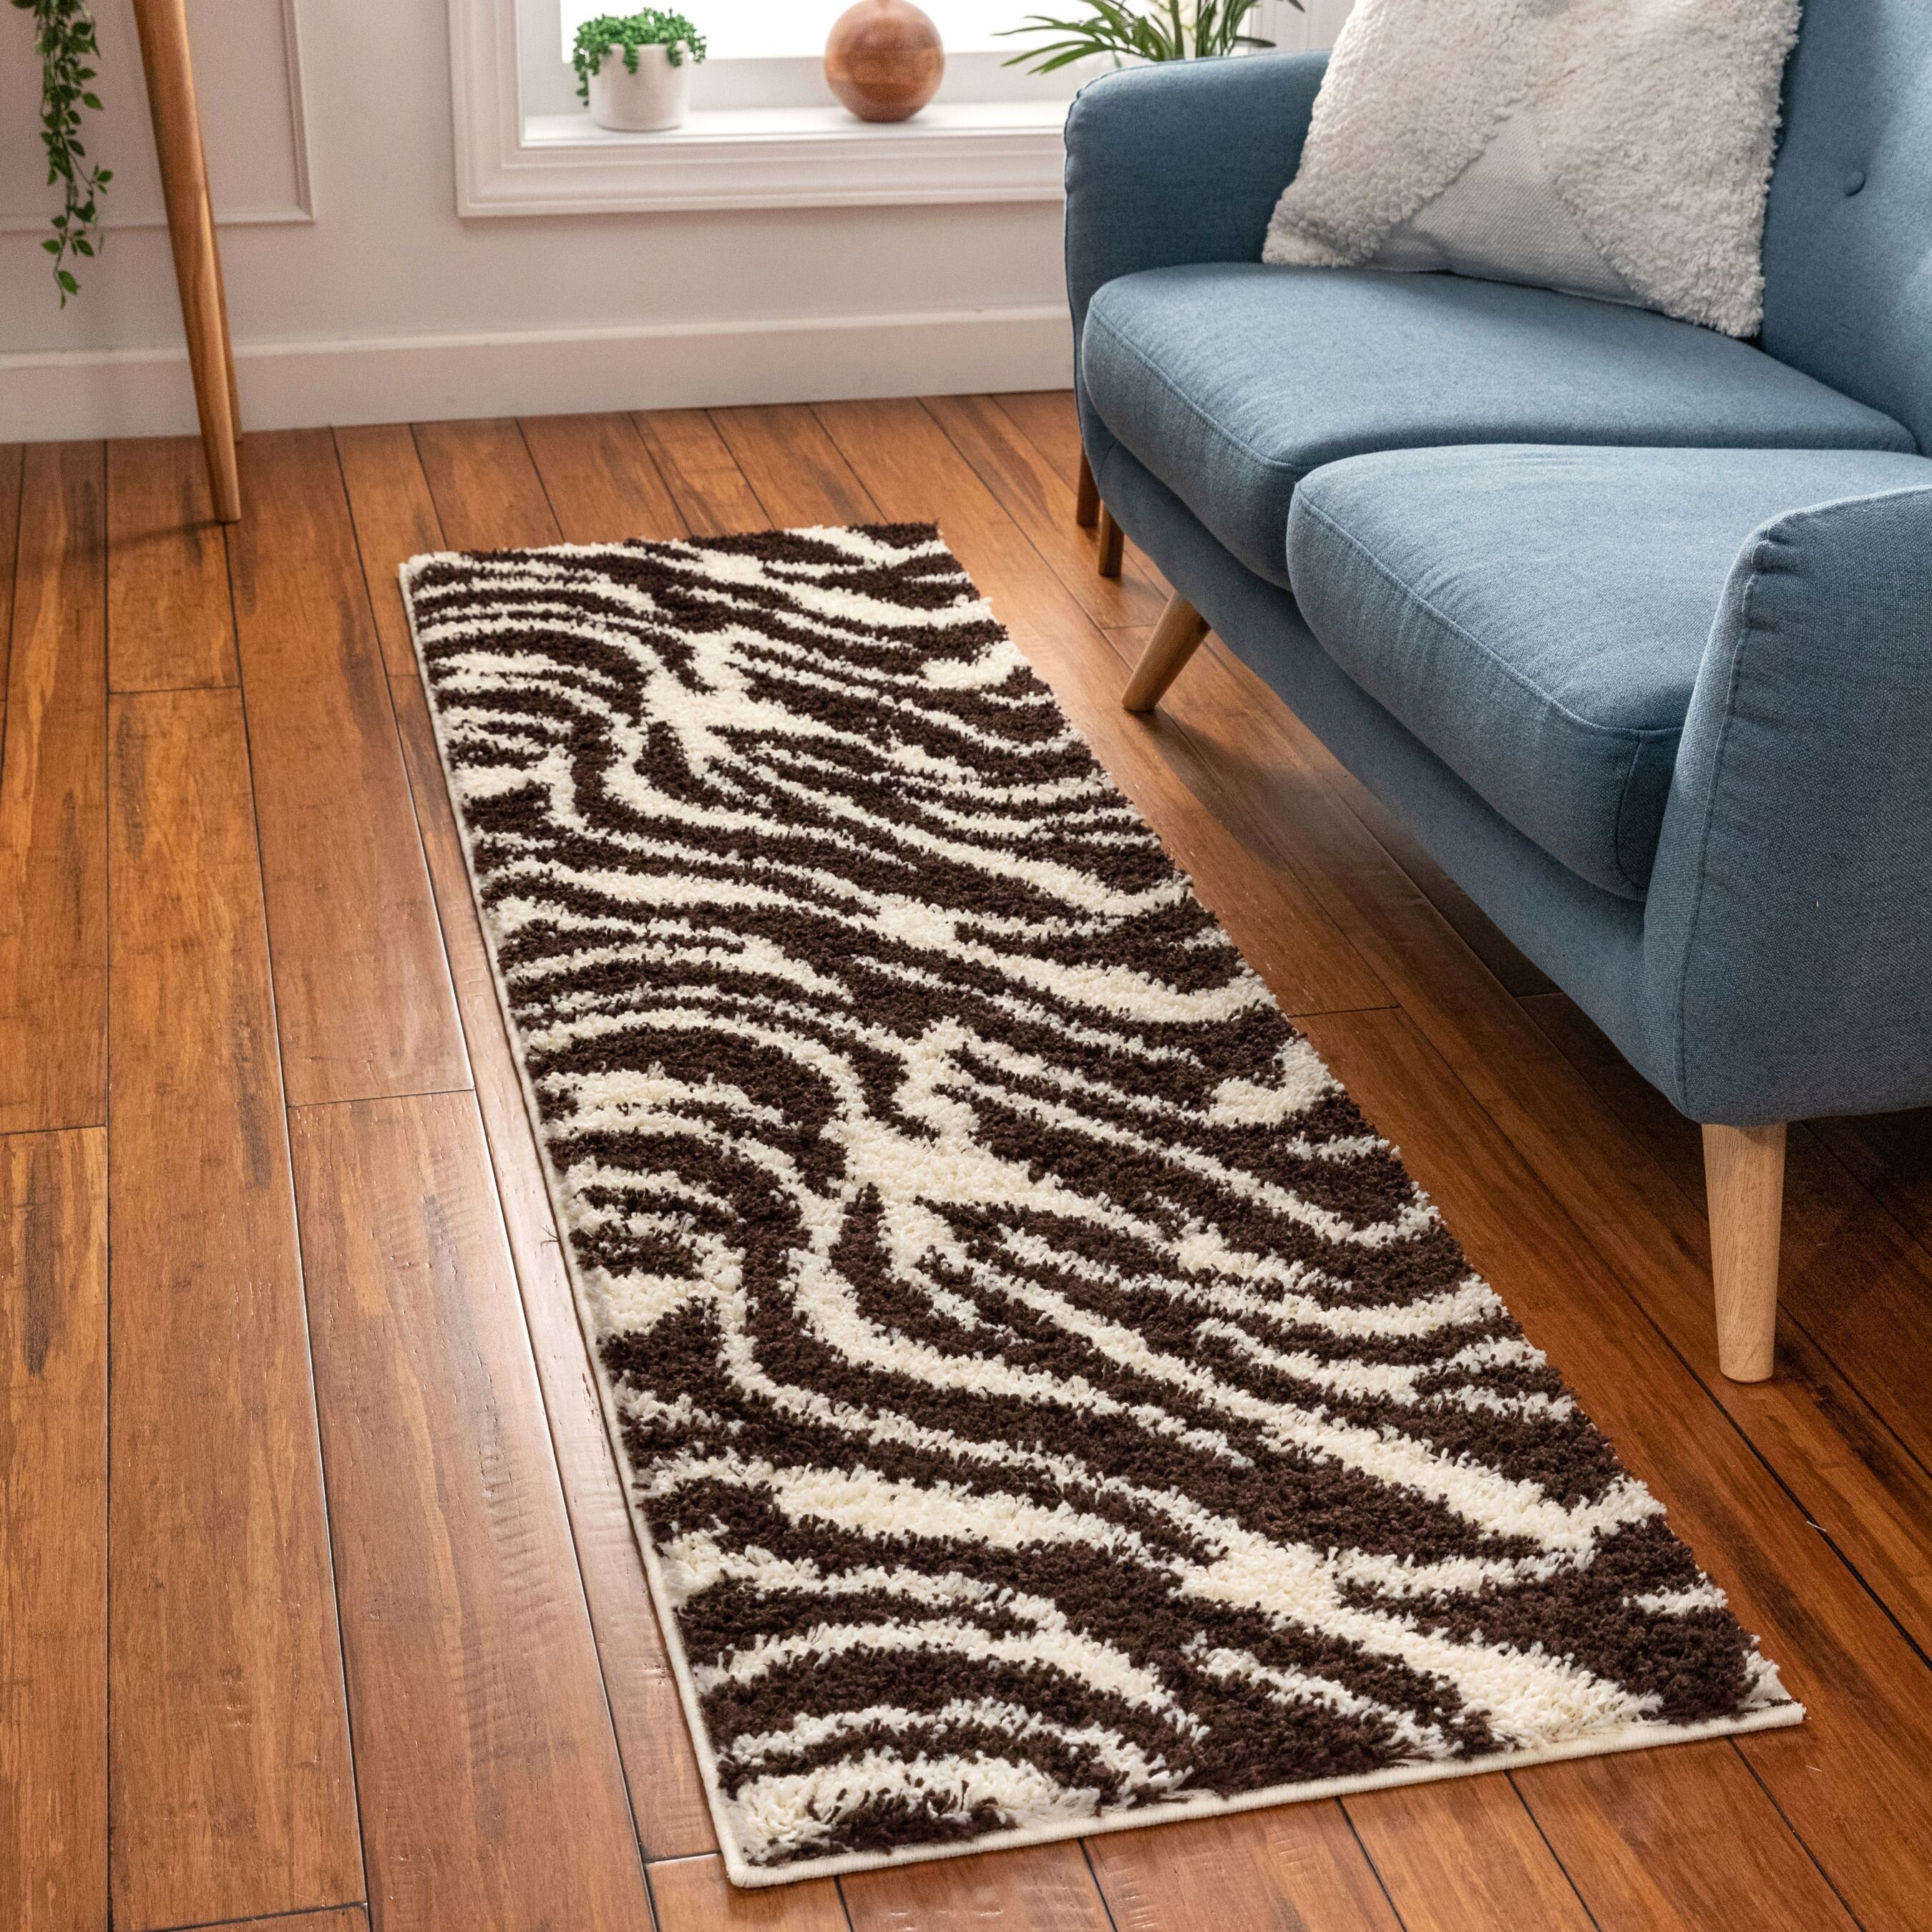 Payless Rugs Clearance All Play Area Rug 5 ft x 7 ft -56245